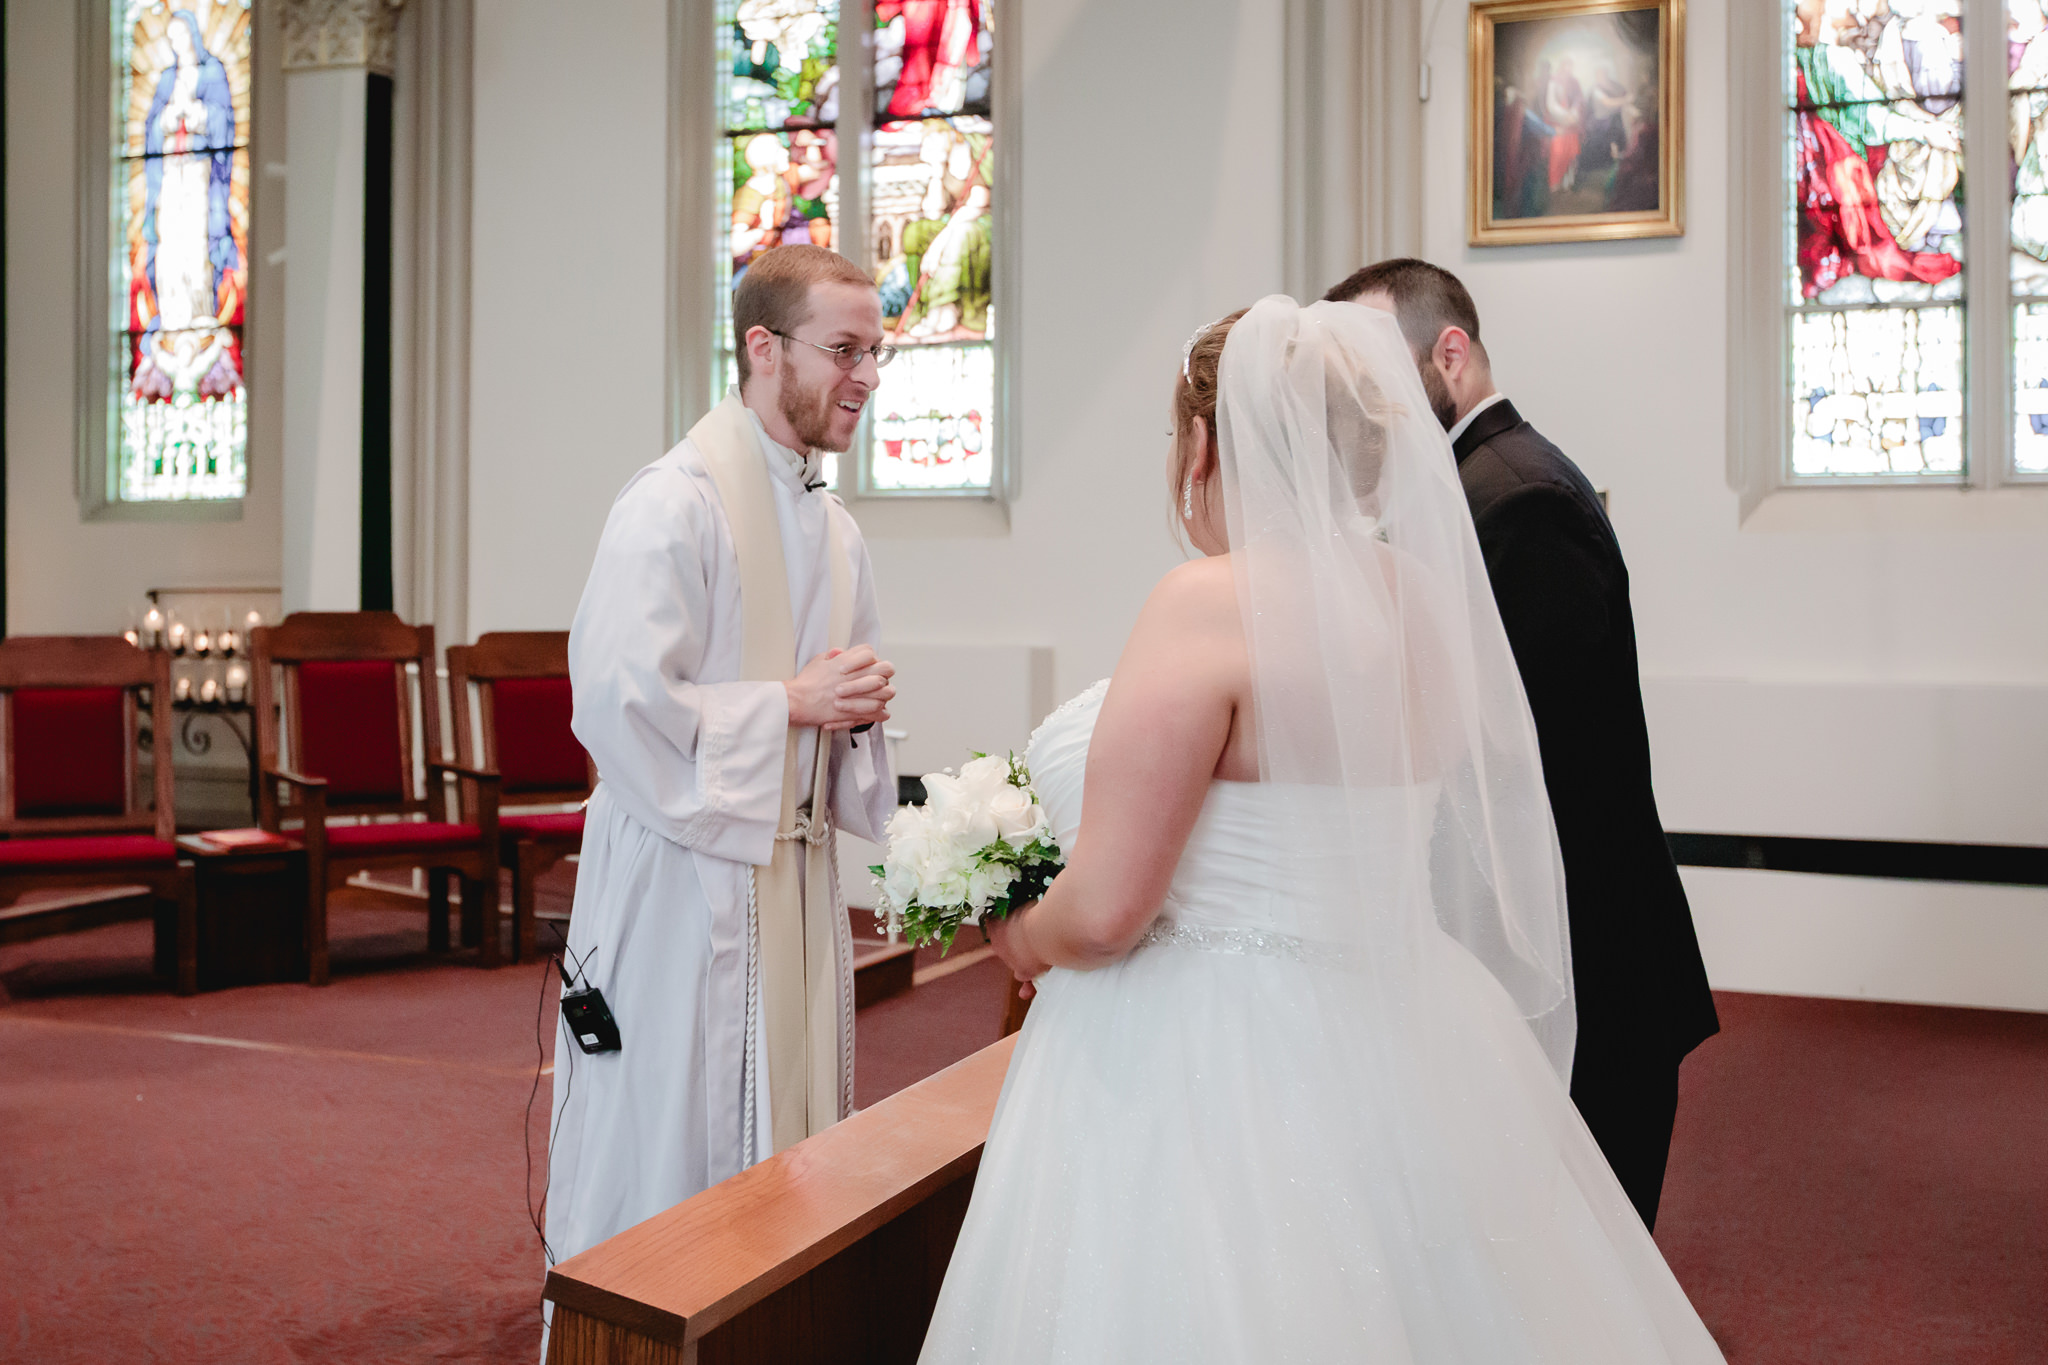 Priest greets the bride and groom at Duquesne University's Chapel of the Holy Spirit